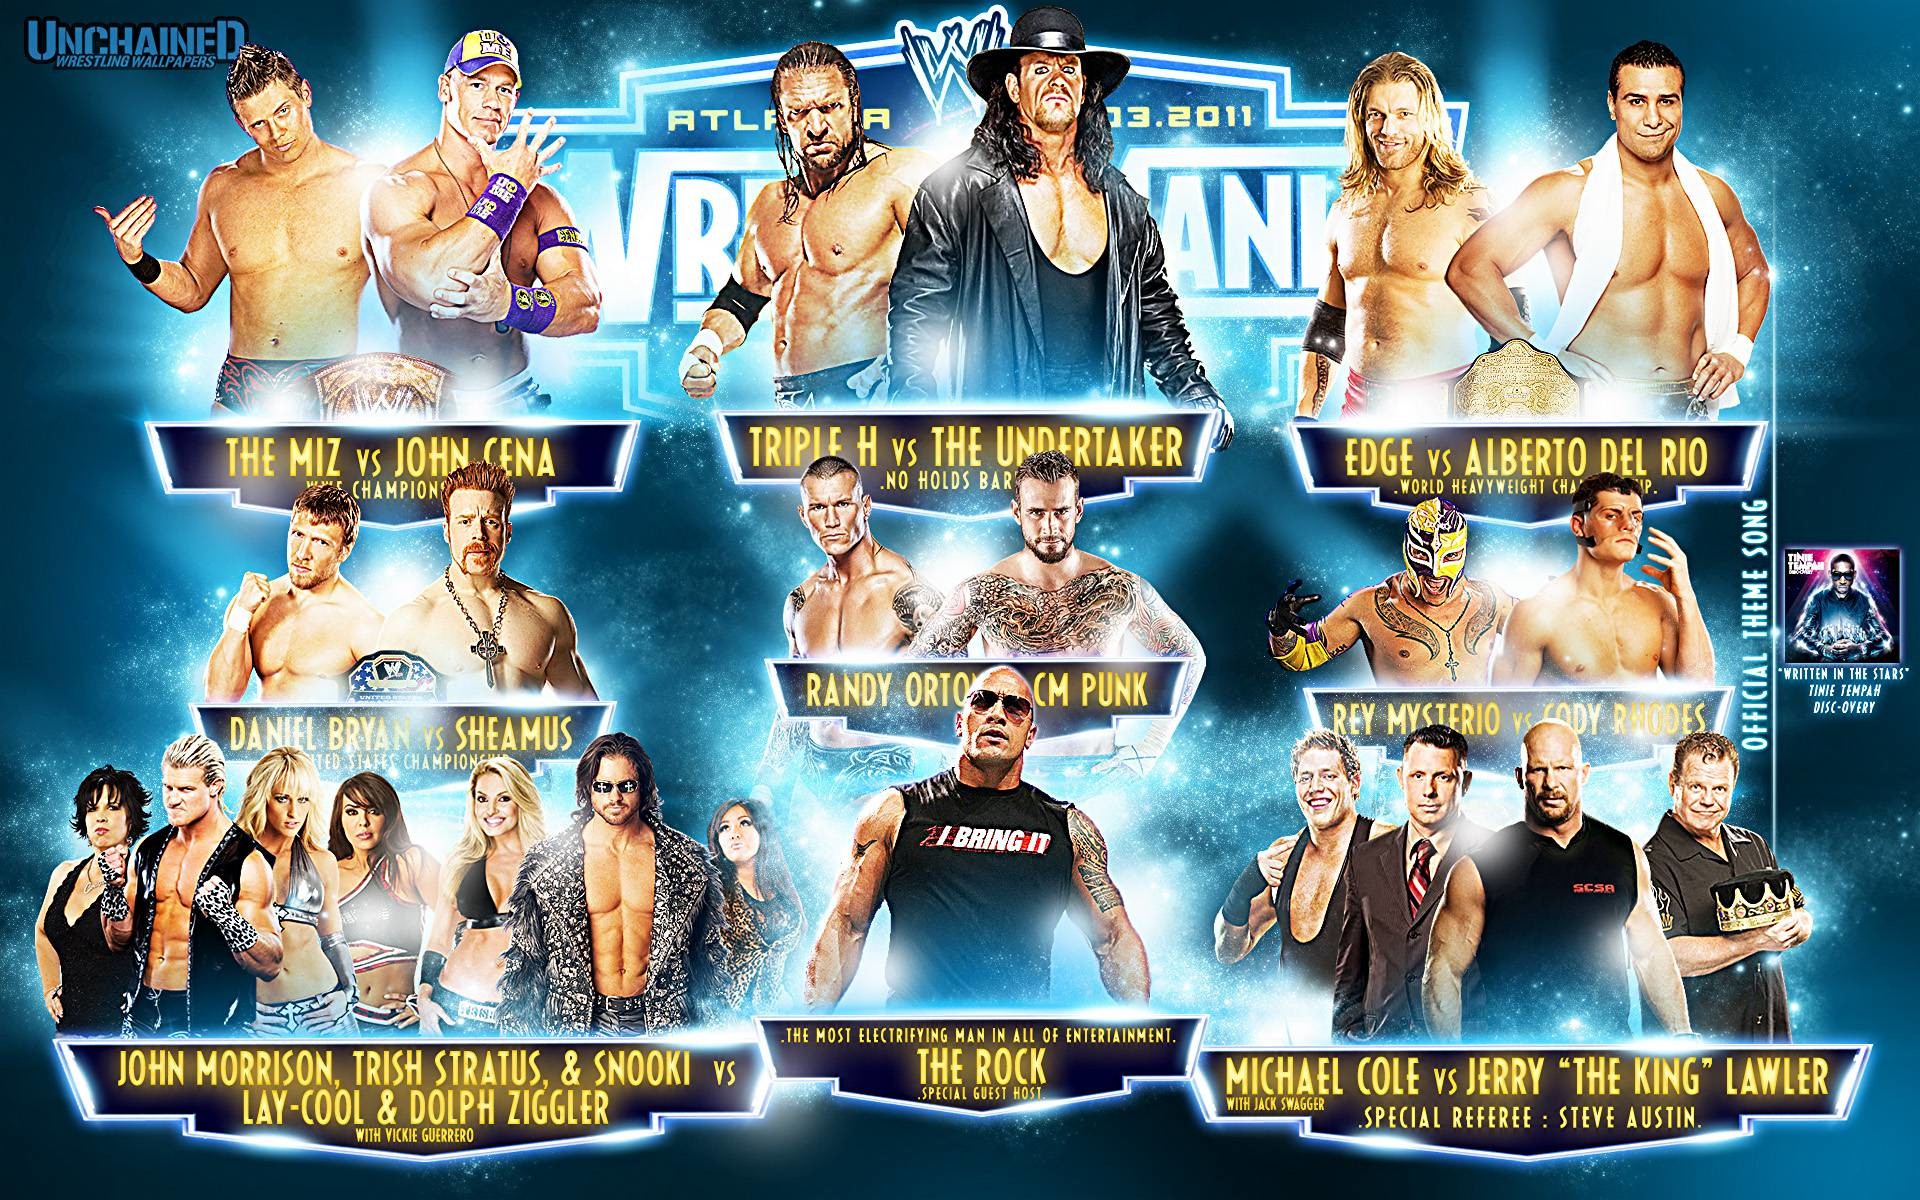 1920x1200 Road To WrestleMania 27 ~ Unchained-WWE.com ~ WWE Wallpapers, The .